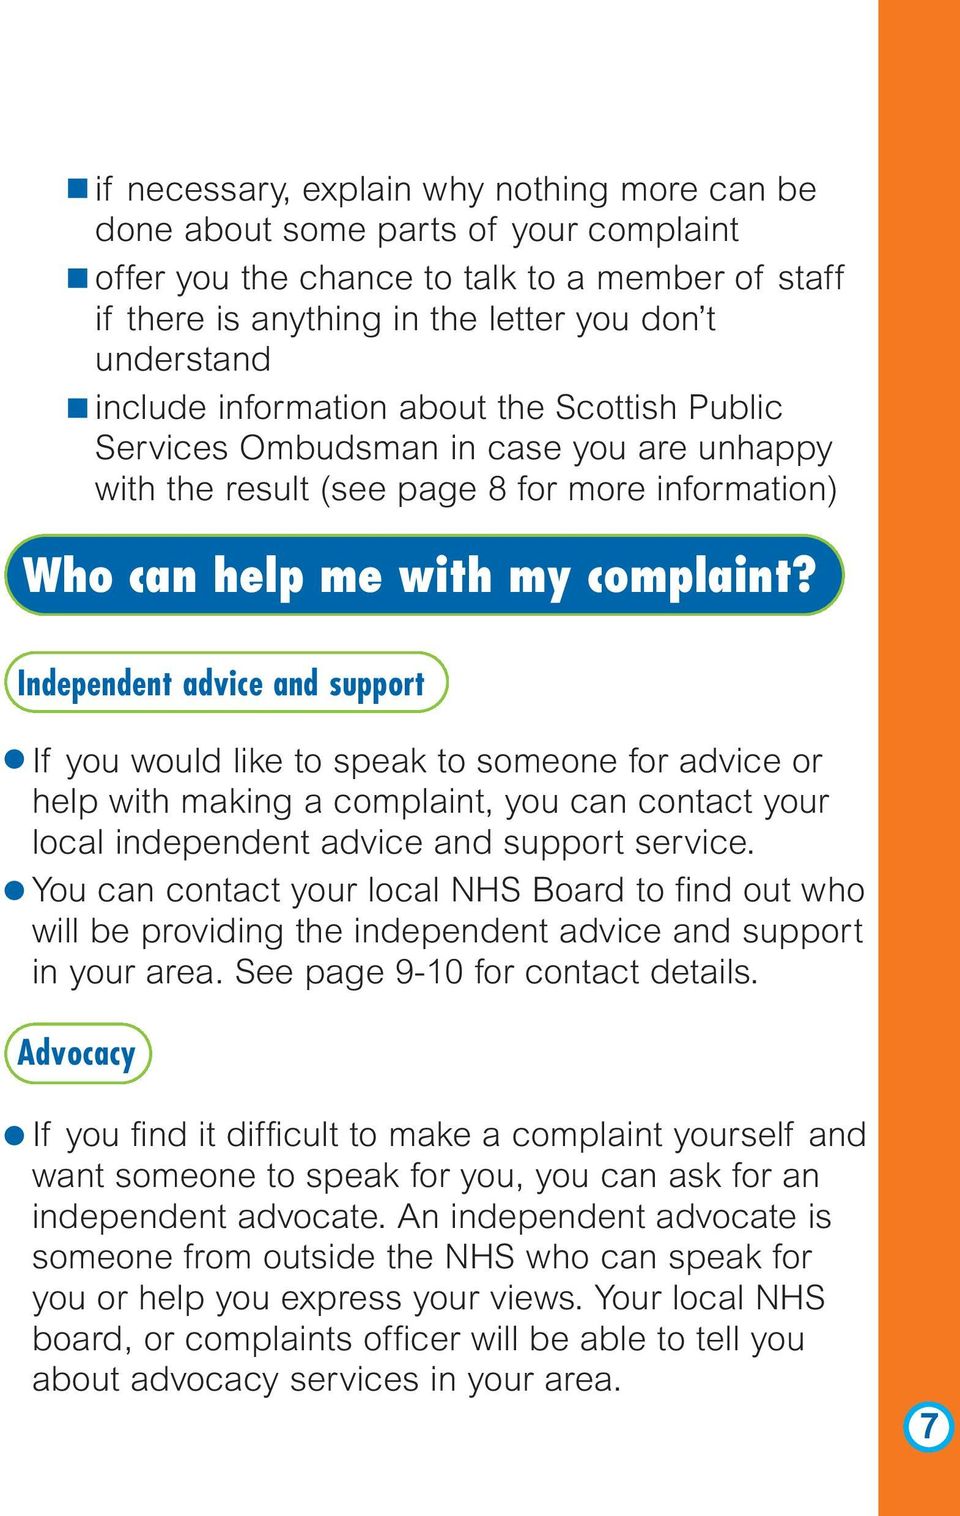 Independent advice and support If you would like to speak to someone for advice or help with making a complaint, you can contact your local independent advice and support service.